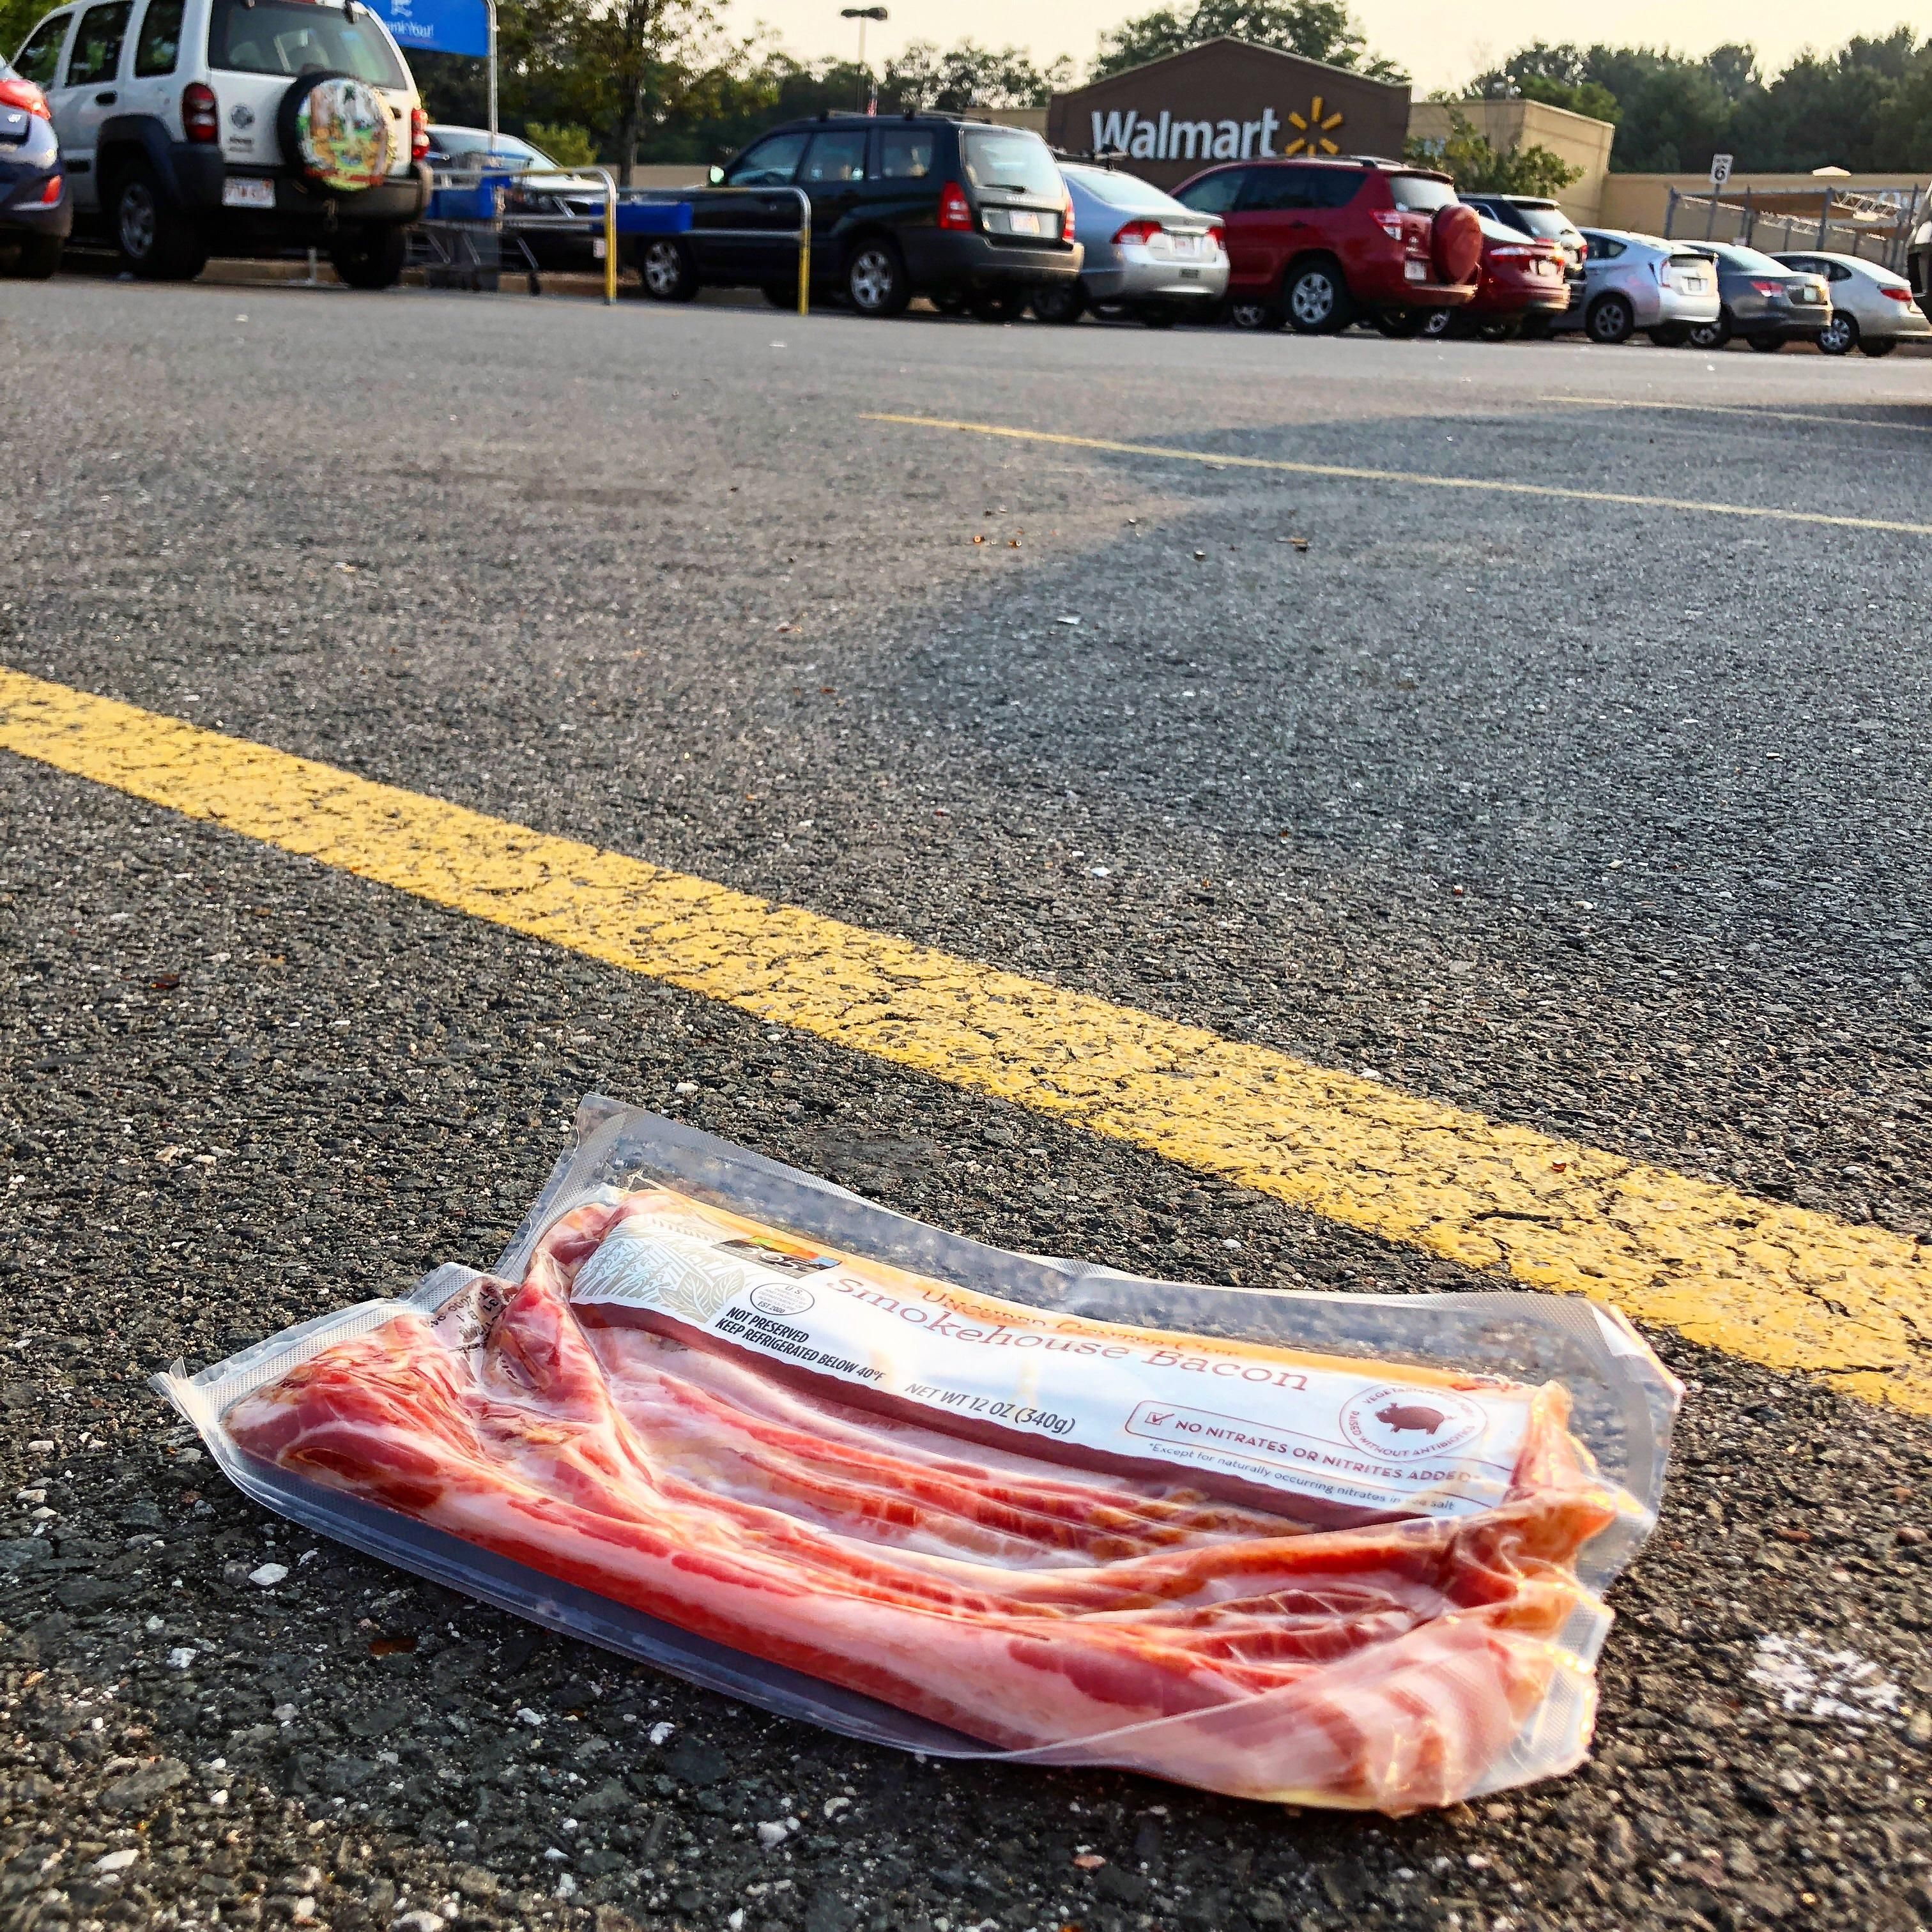 Someone failed to bring home the bacon.